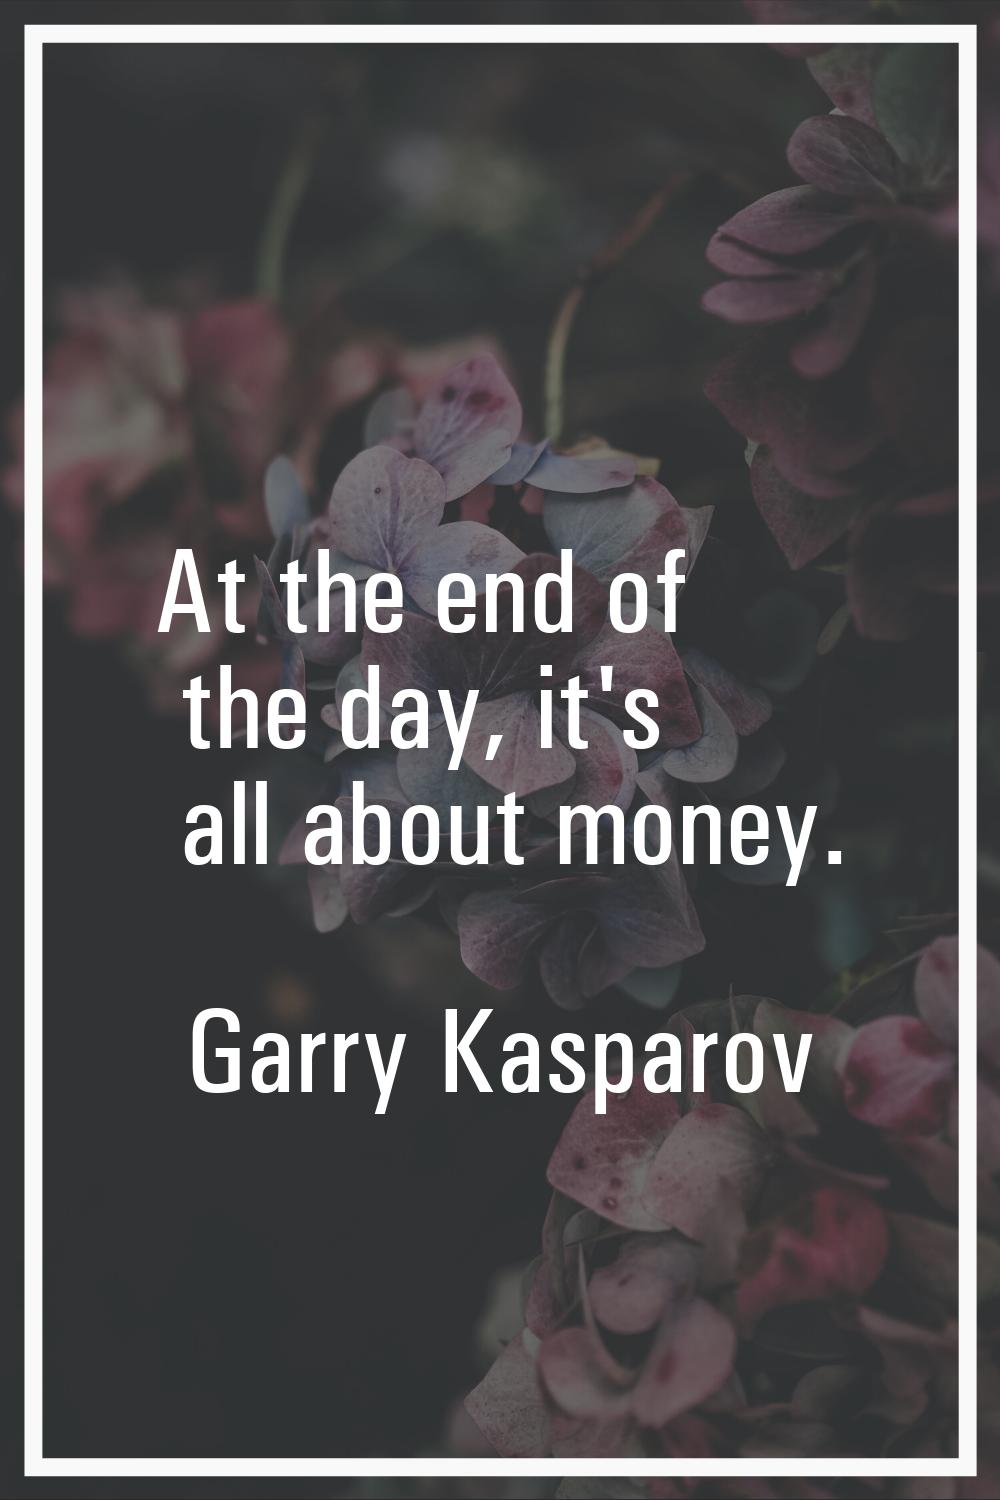 At the end of the day, it's all about money.